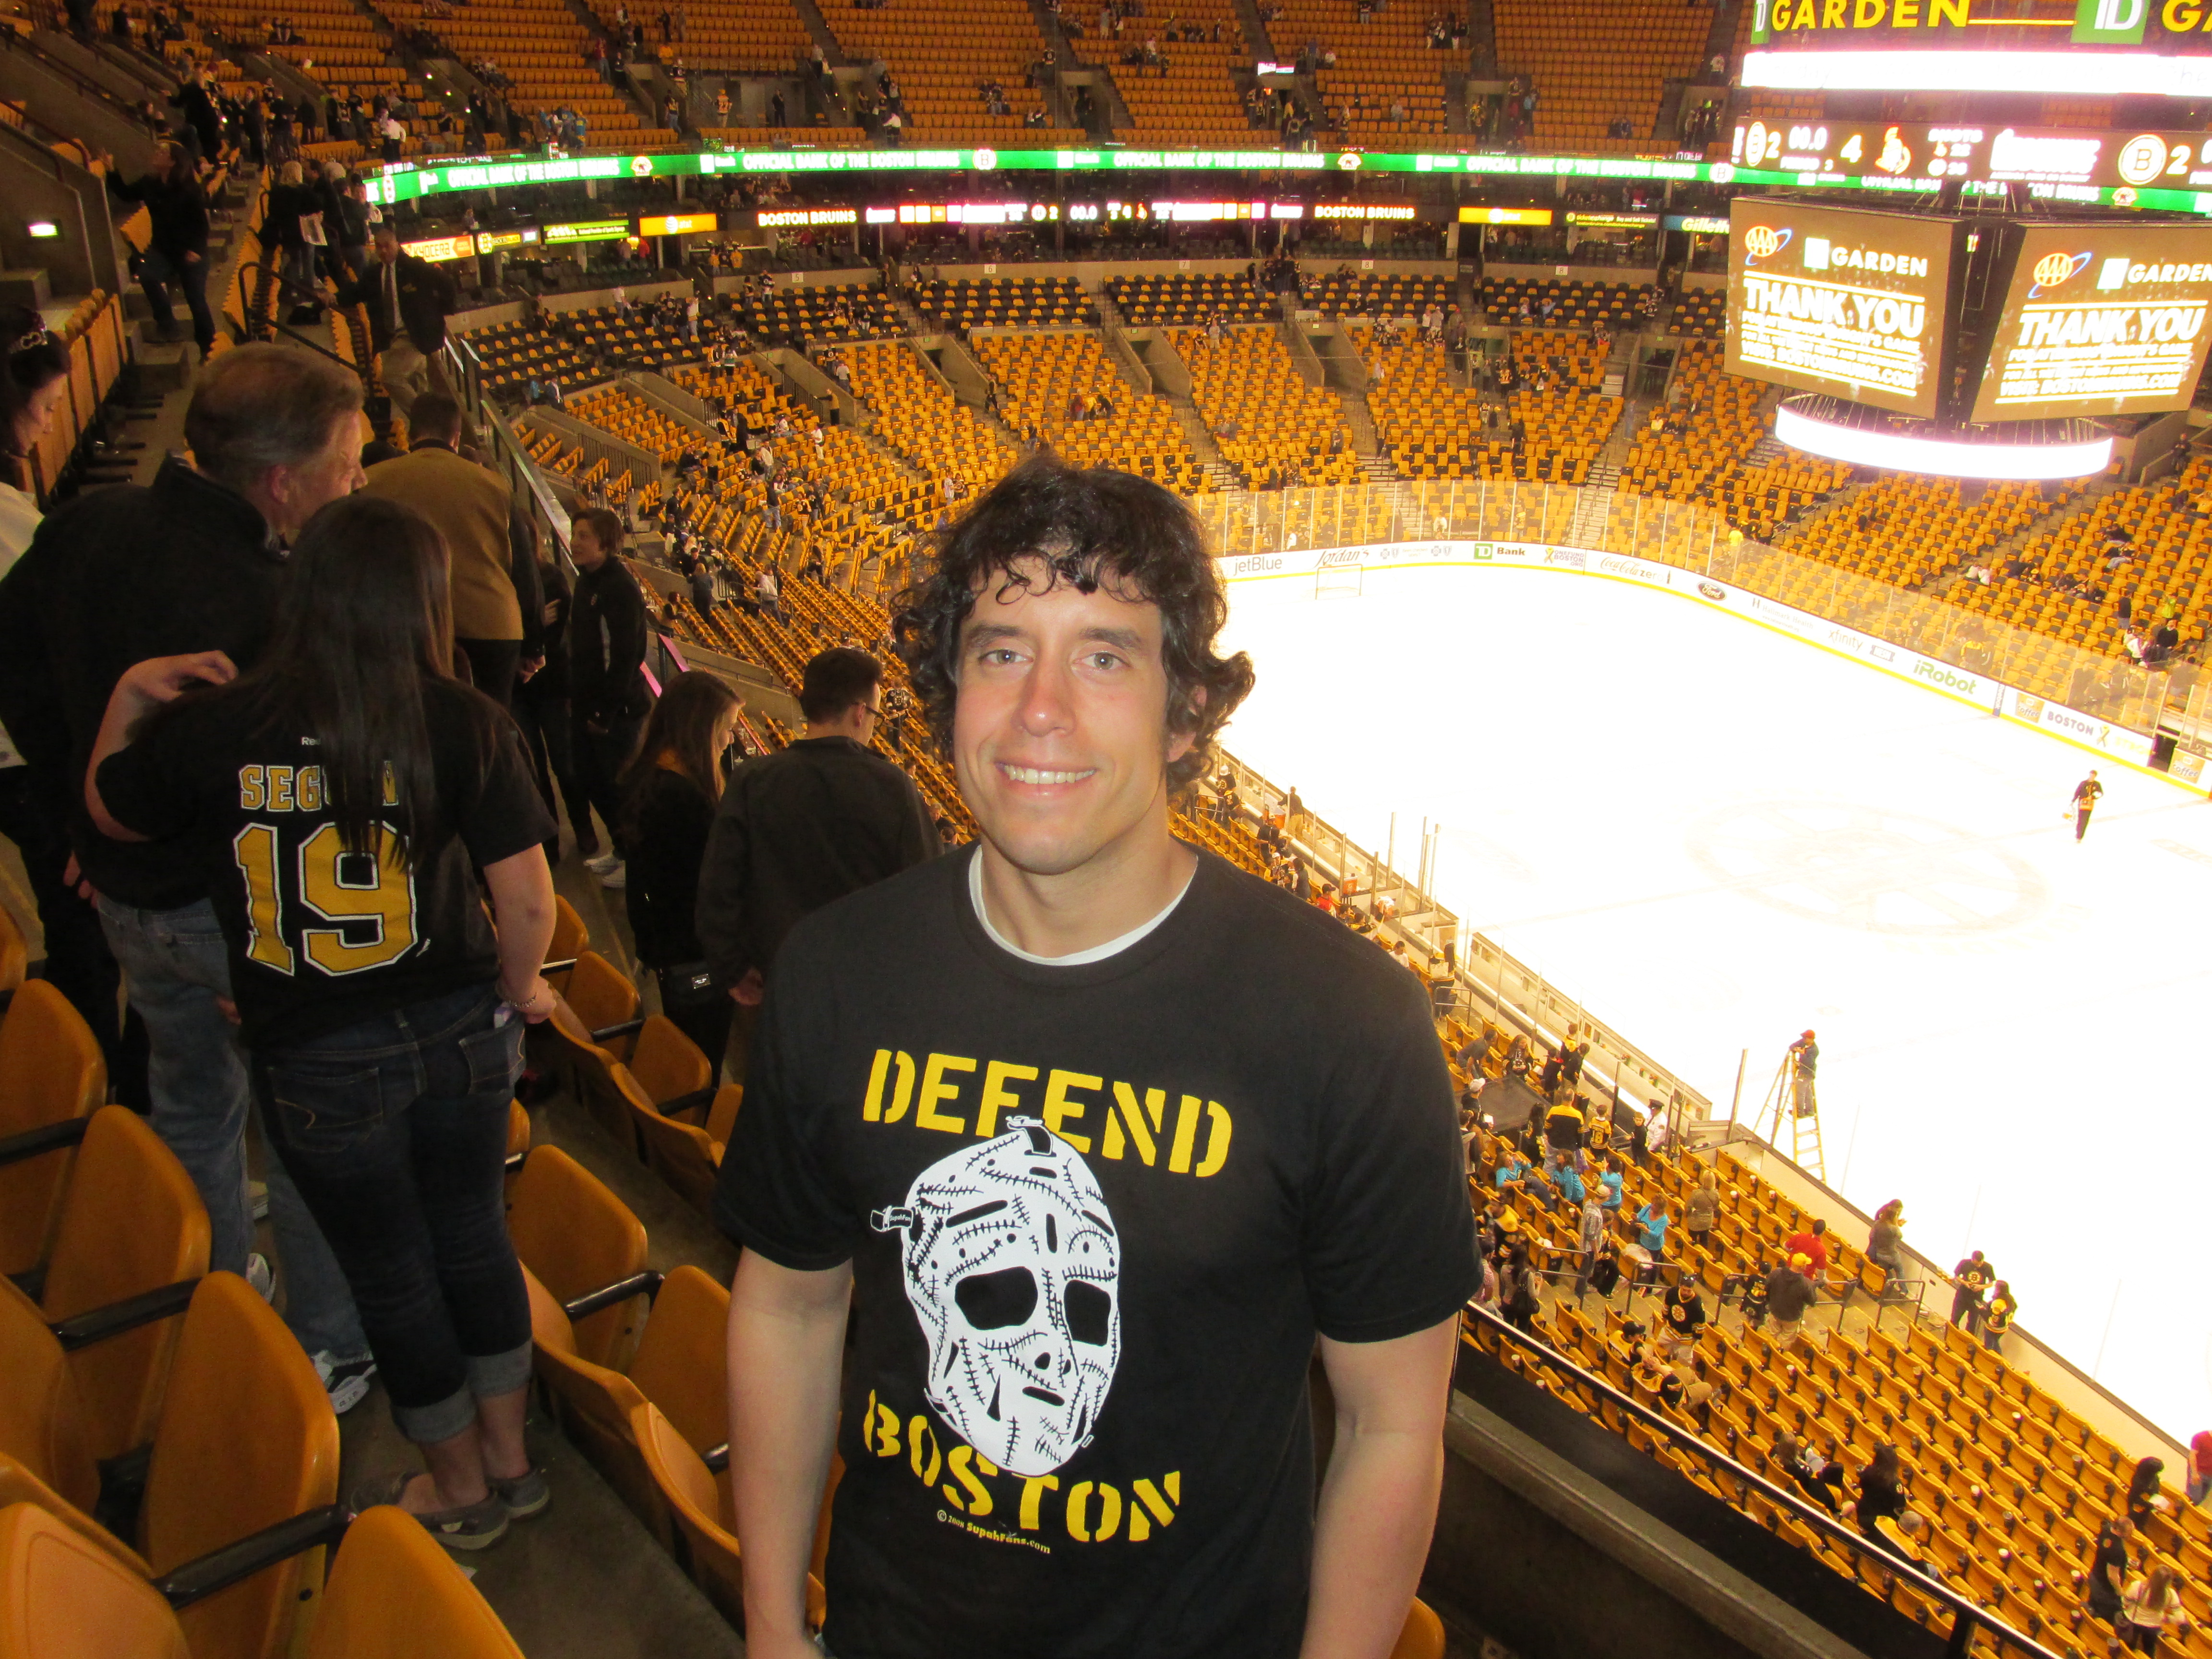 Decked out in my Bruins gear for NHL action.